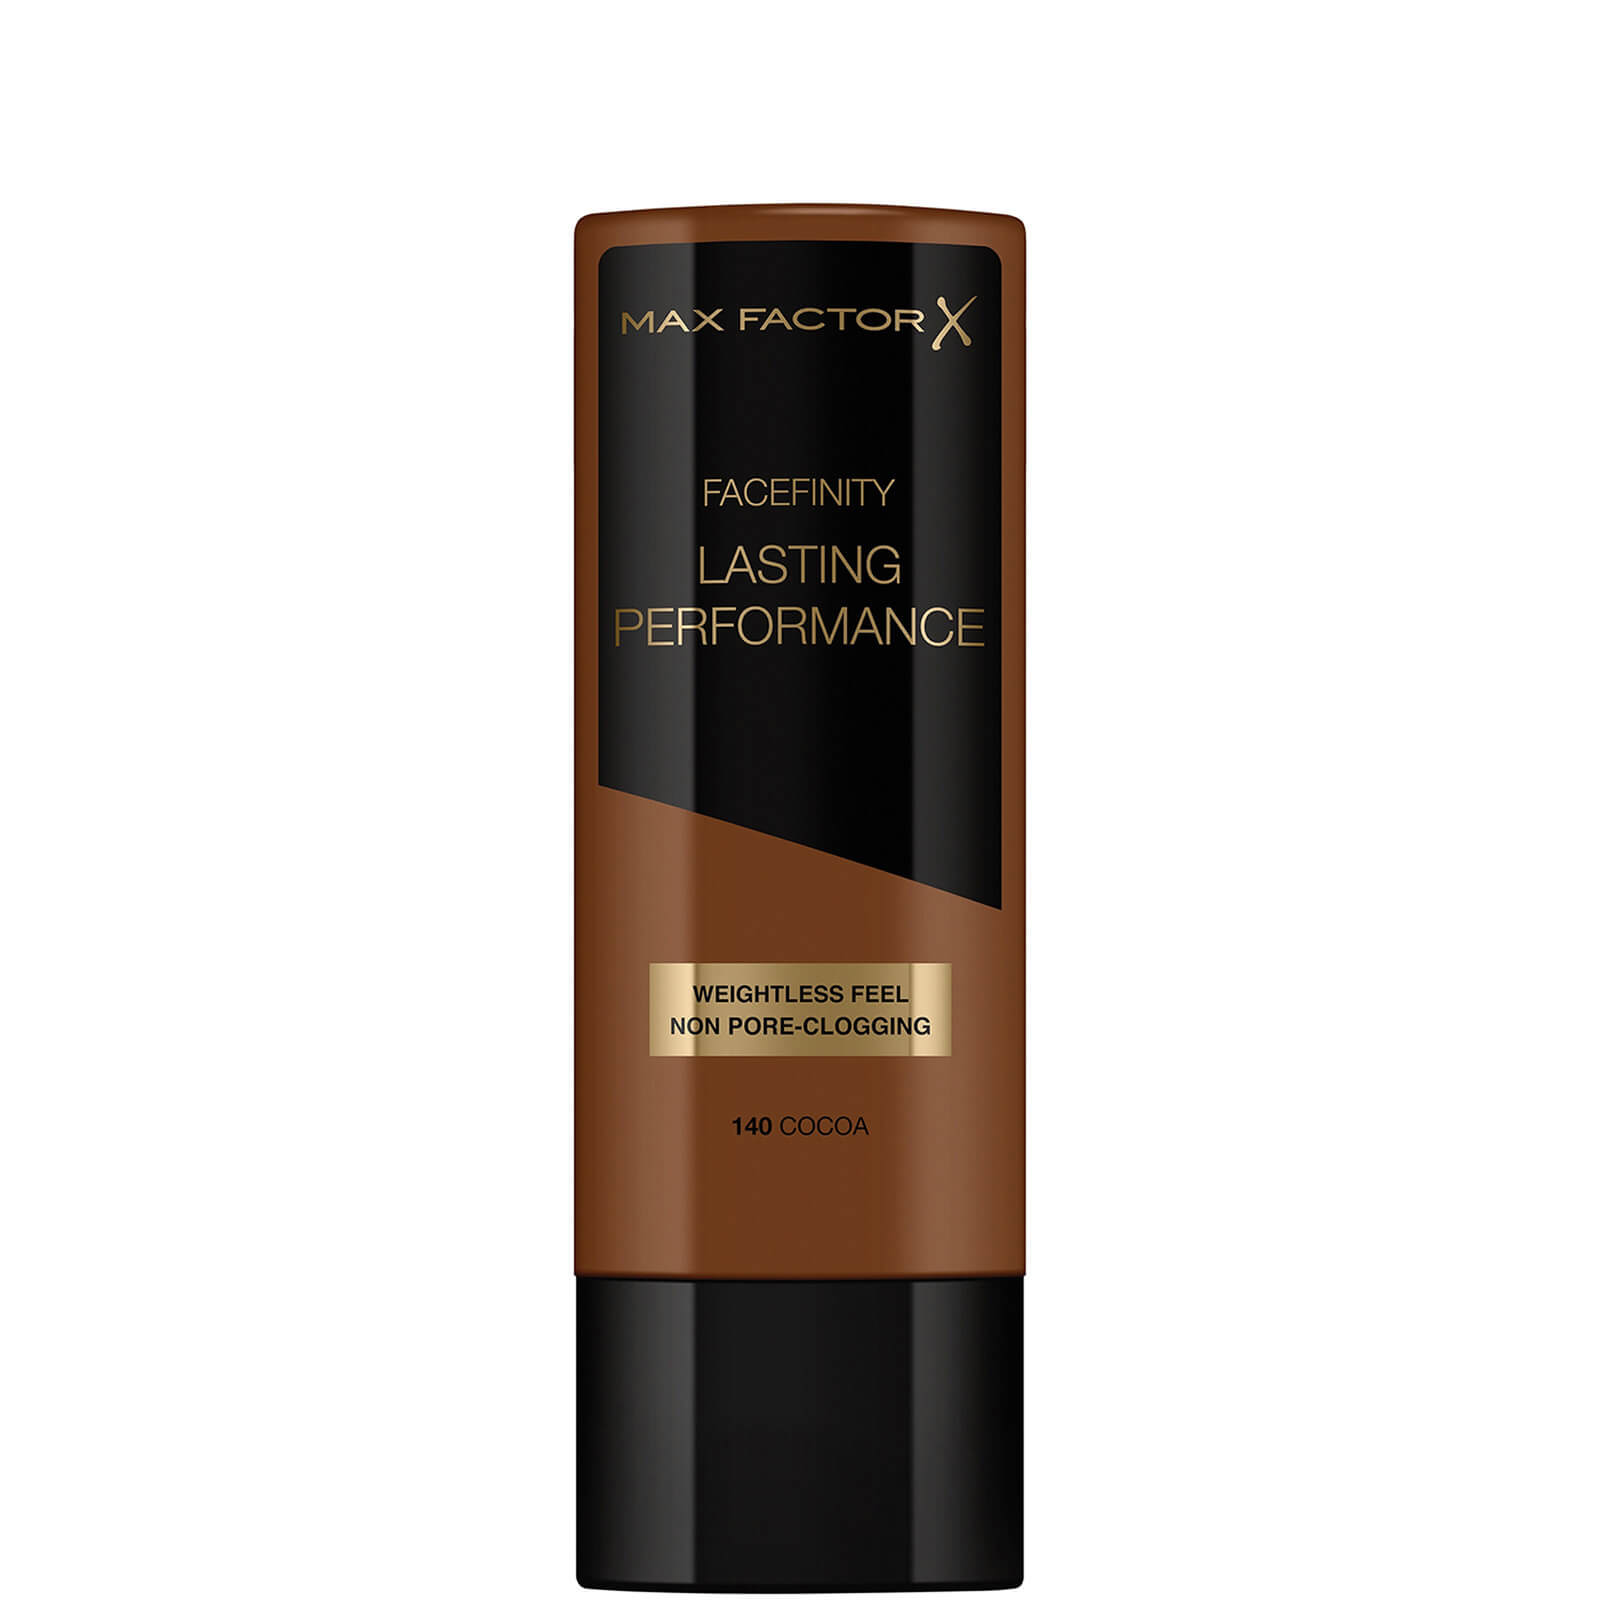 Max Factor Lasting Performance Restage 35g (Various Shades) - 140 Cocoa